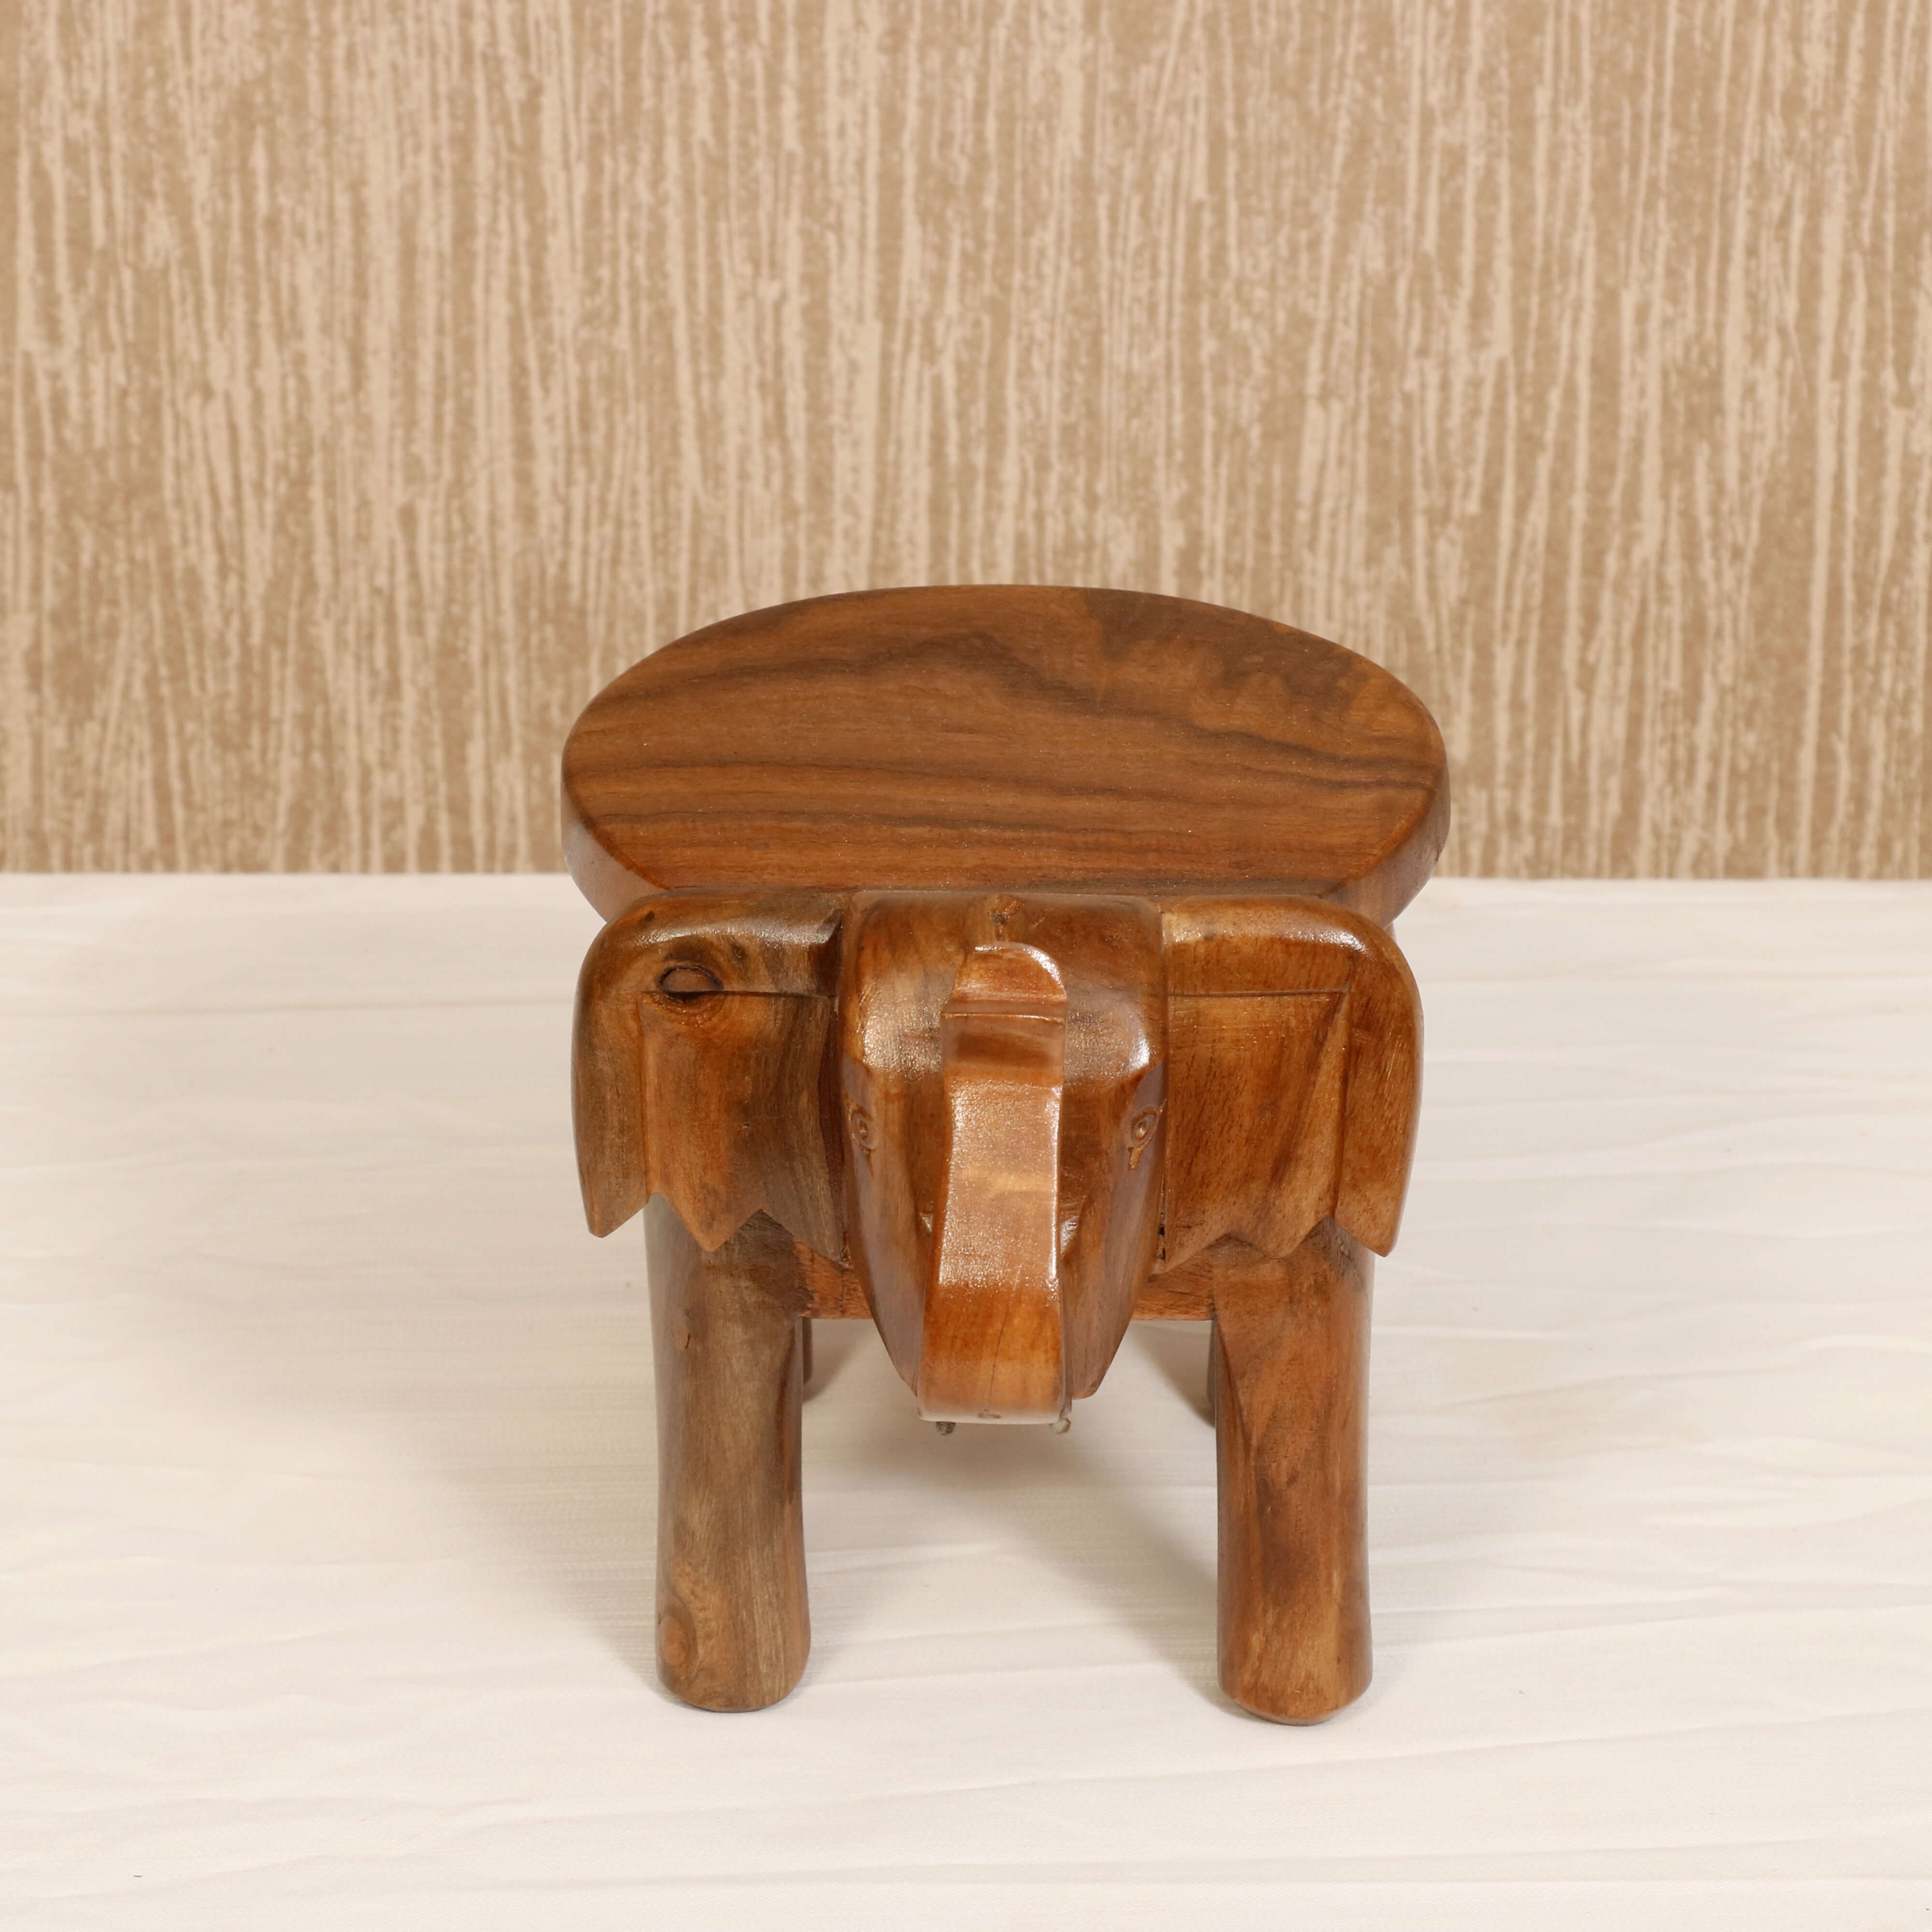 Wooden Tone Elephant Table Stand Animal Figurine